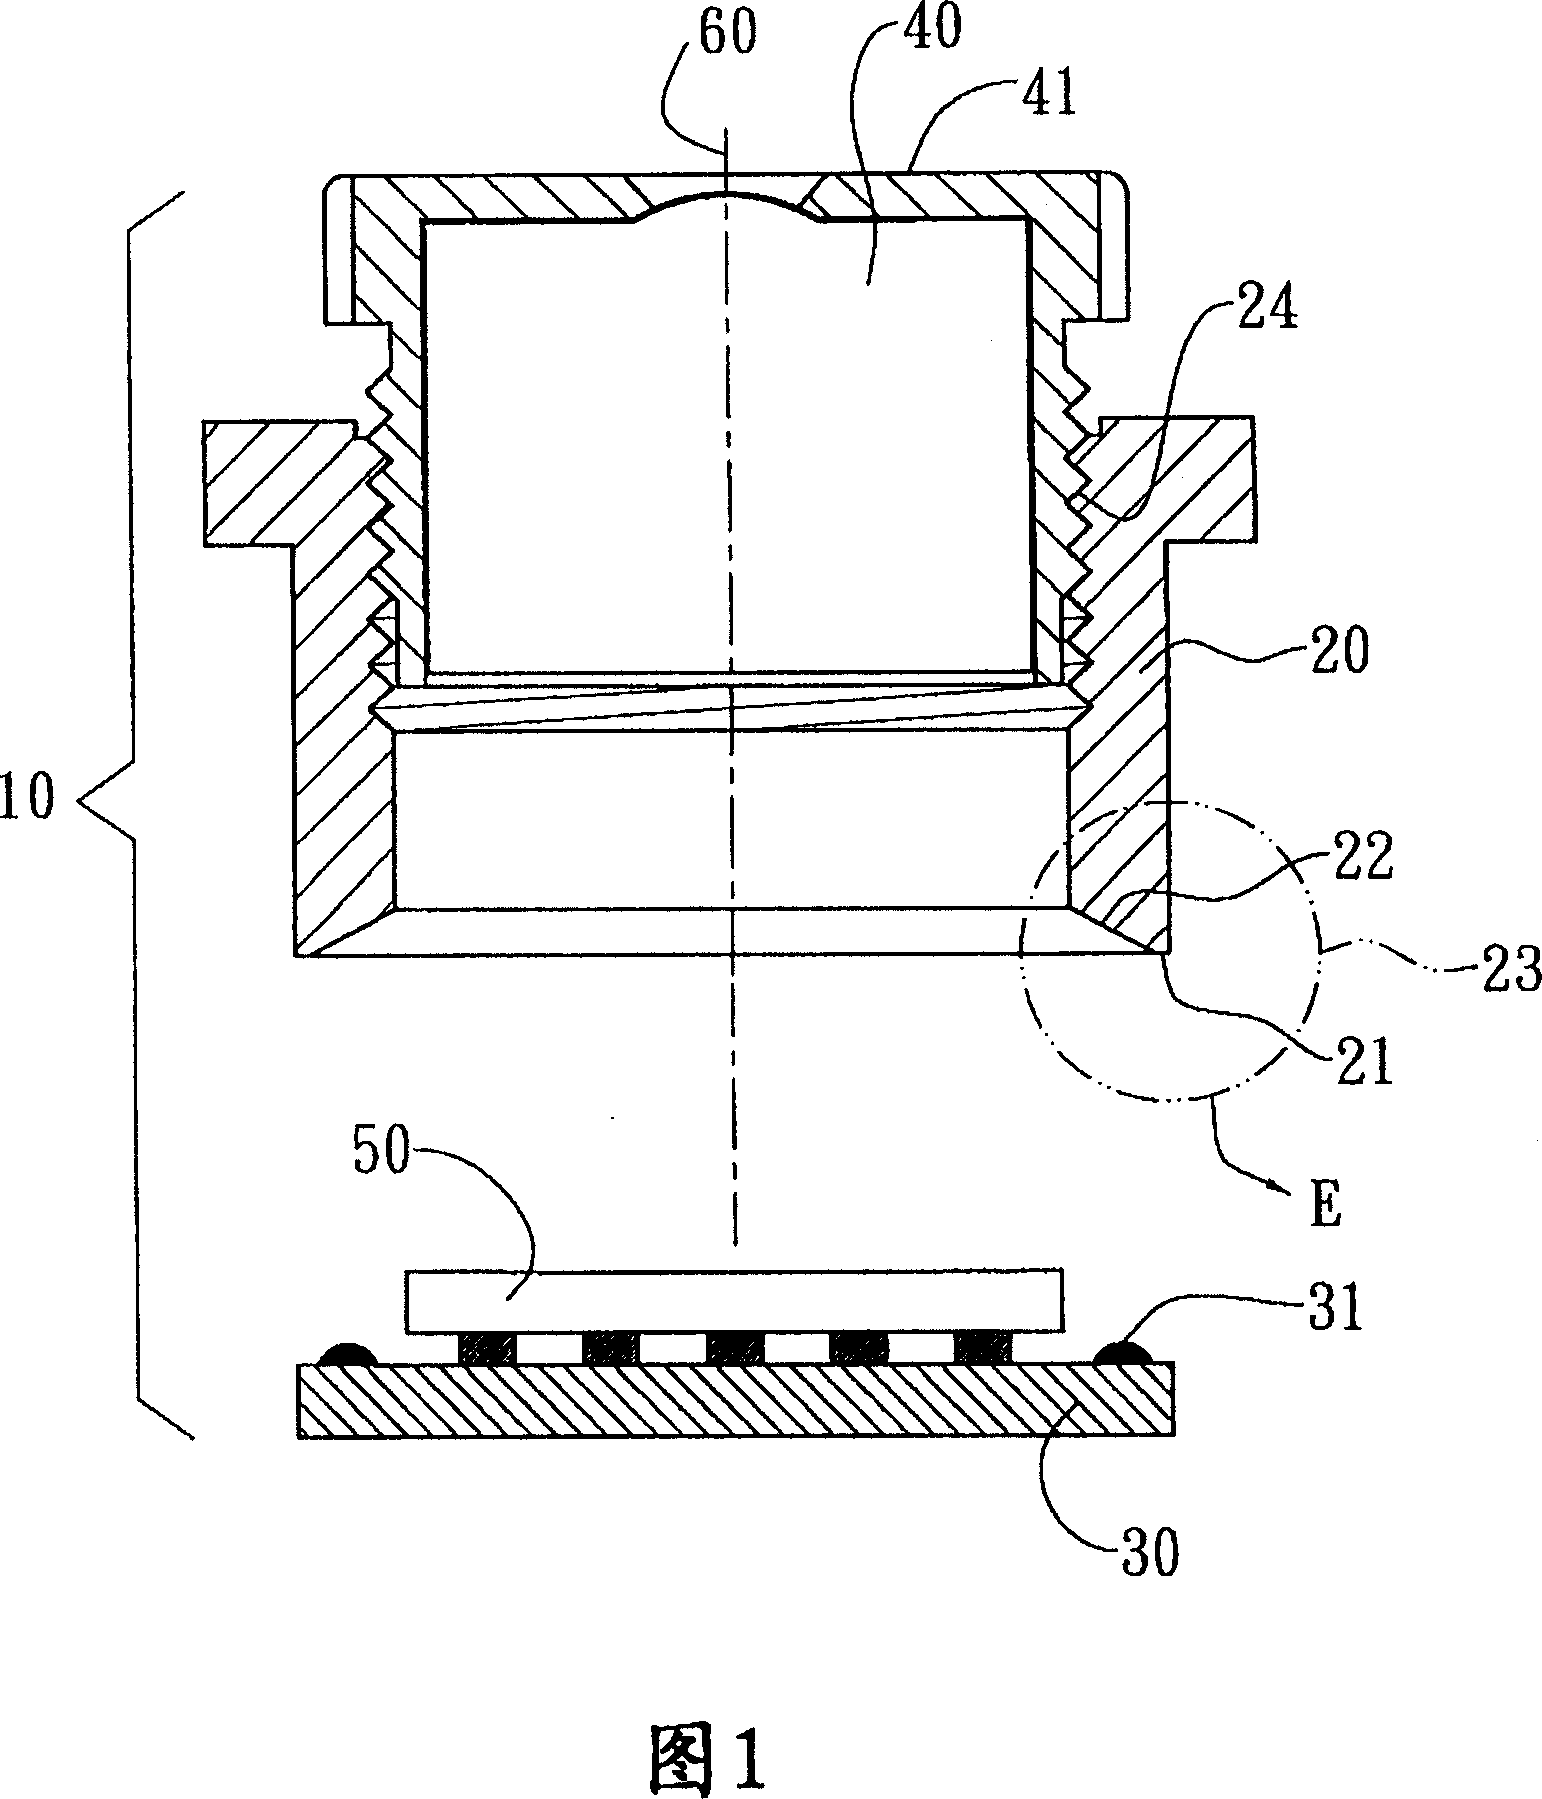 Structure for preventing glue leakage of lens base